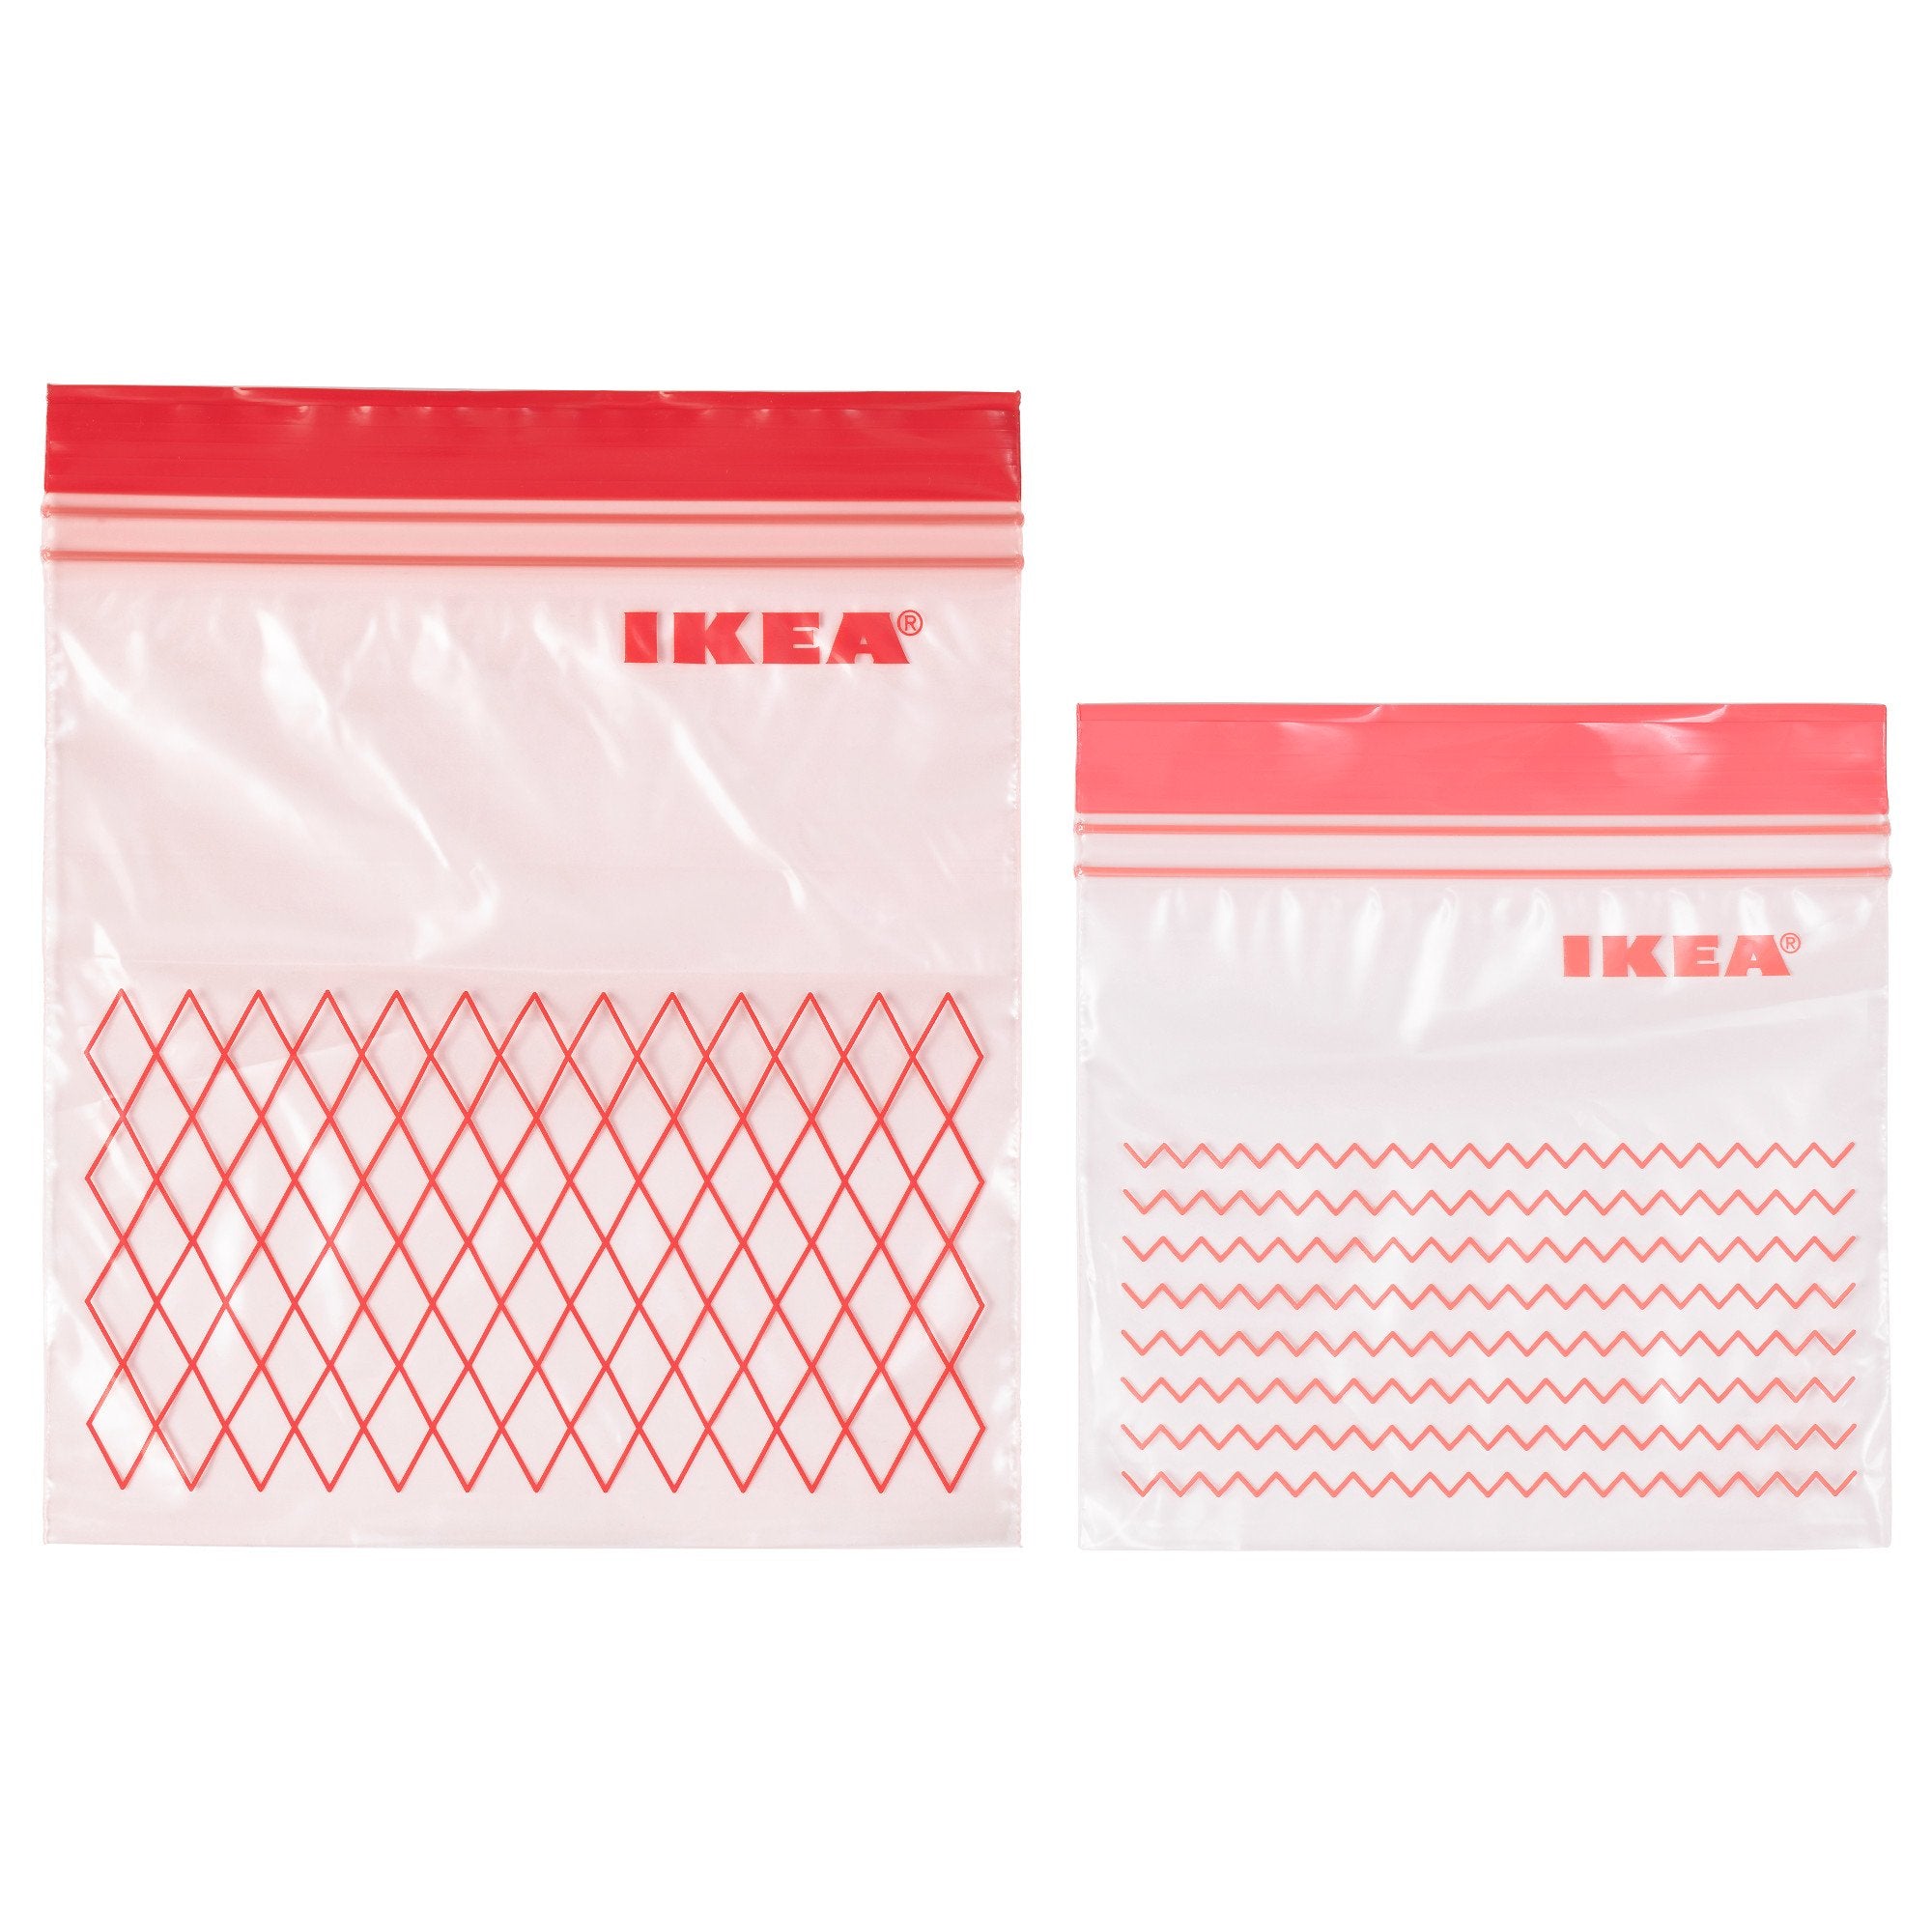 ISTAD Plastic Bag, Red, Pack of 60, Comprises: 30 bags (0.4 l) and 30 bags (1 l), Can be used over and over again since it can be re-sealed.